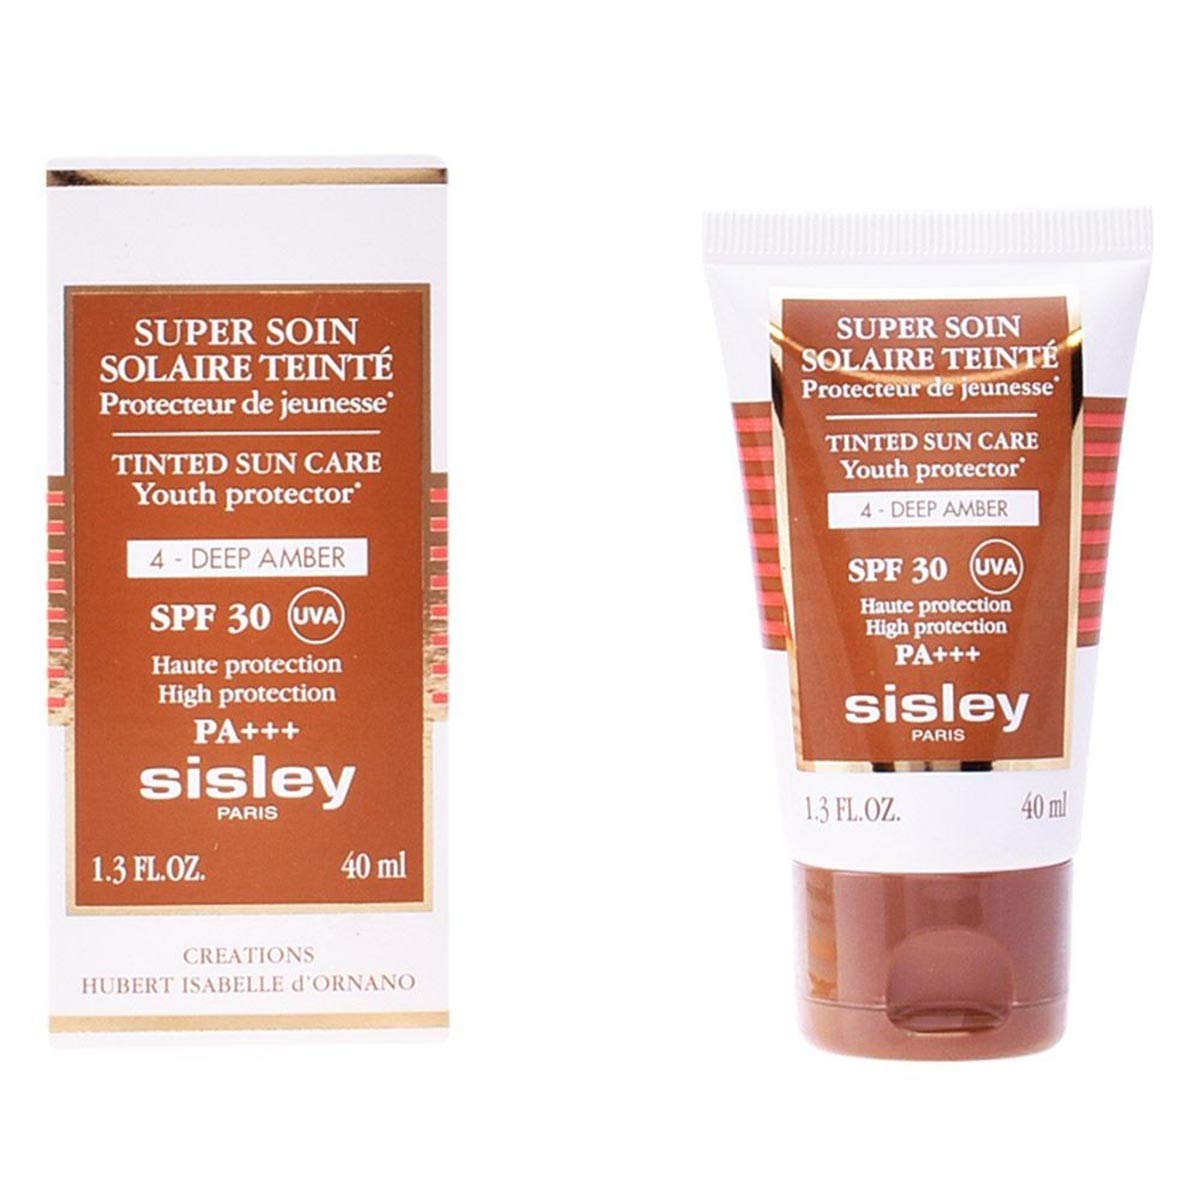 Sisley Super Soin Solaire Tinted Youth Protector SPF 30 Uva Pa+++, No. 4 Deep Amber, 1.3